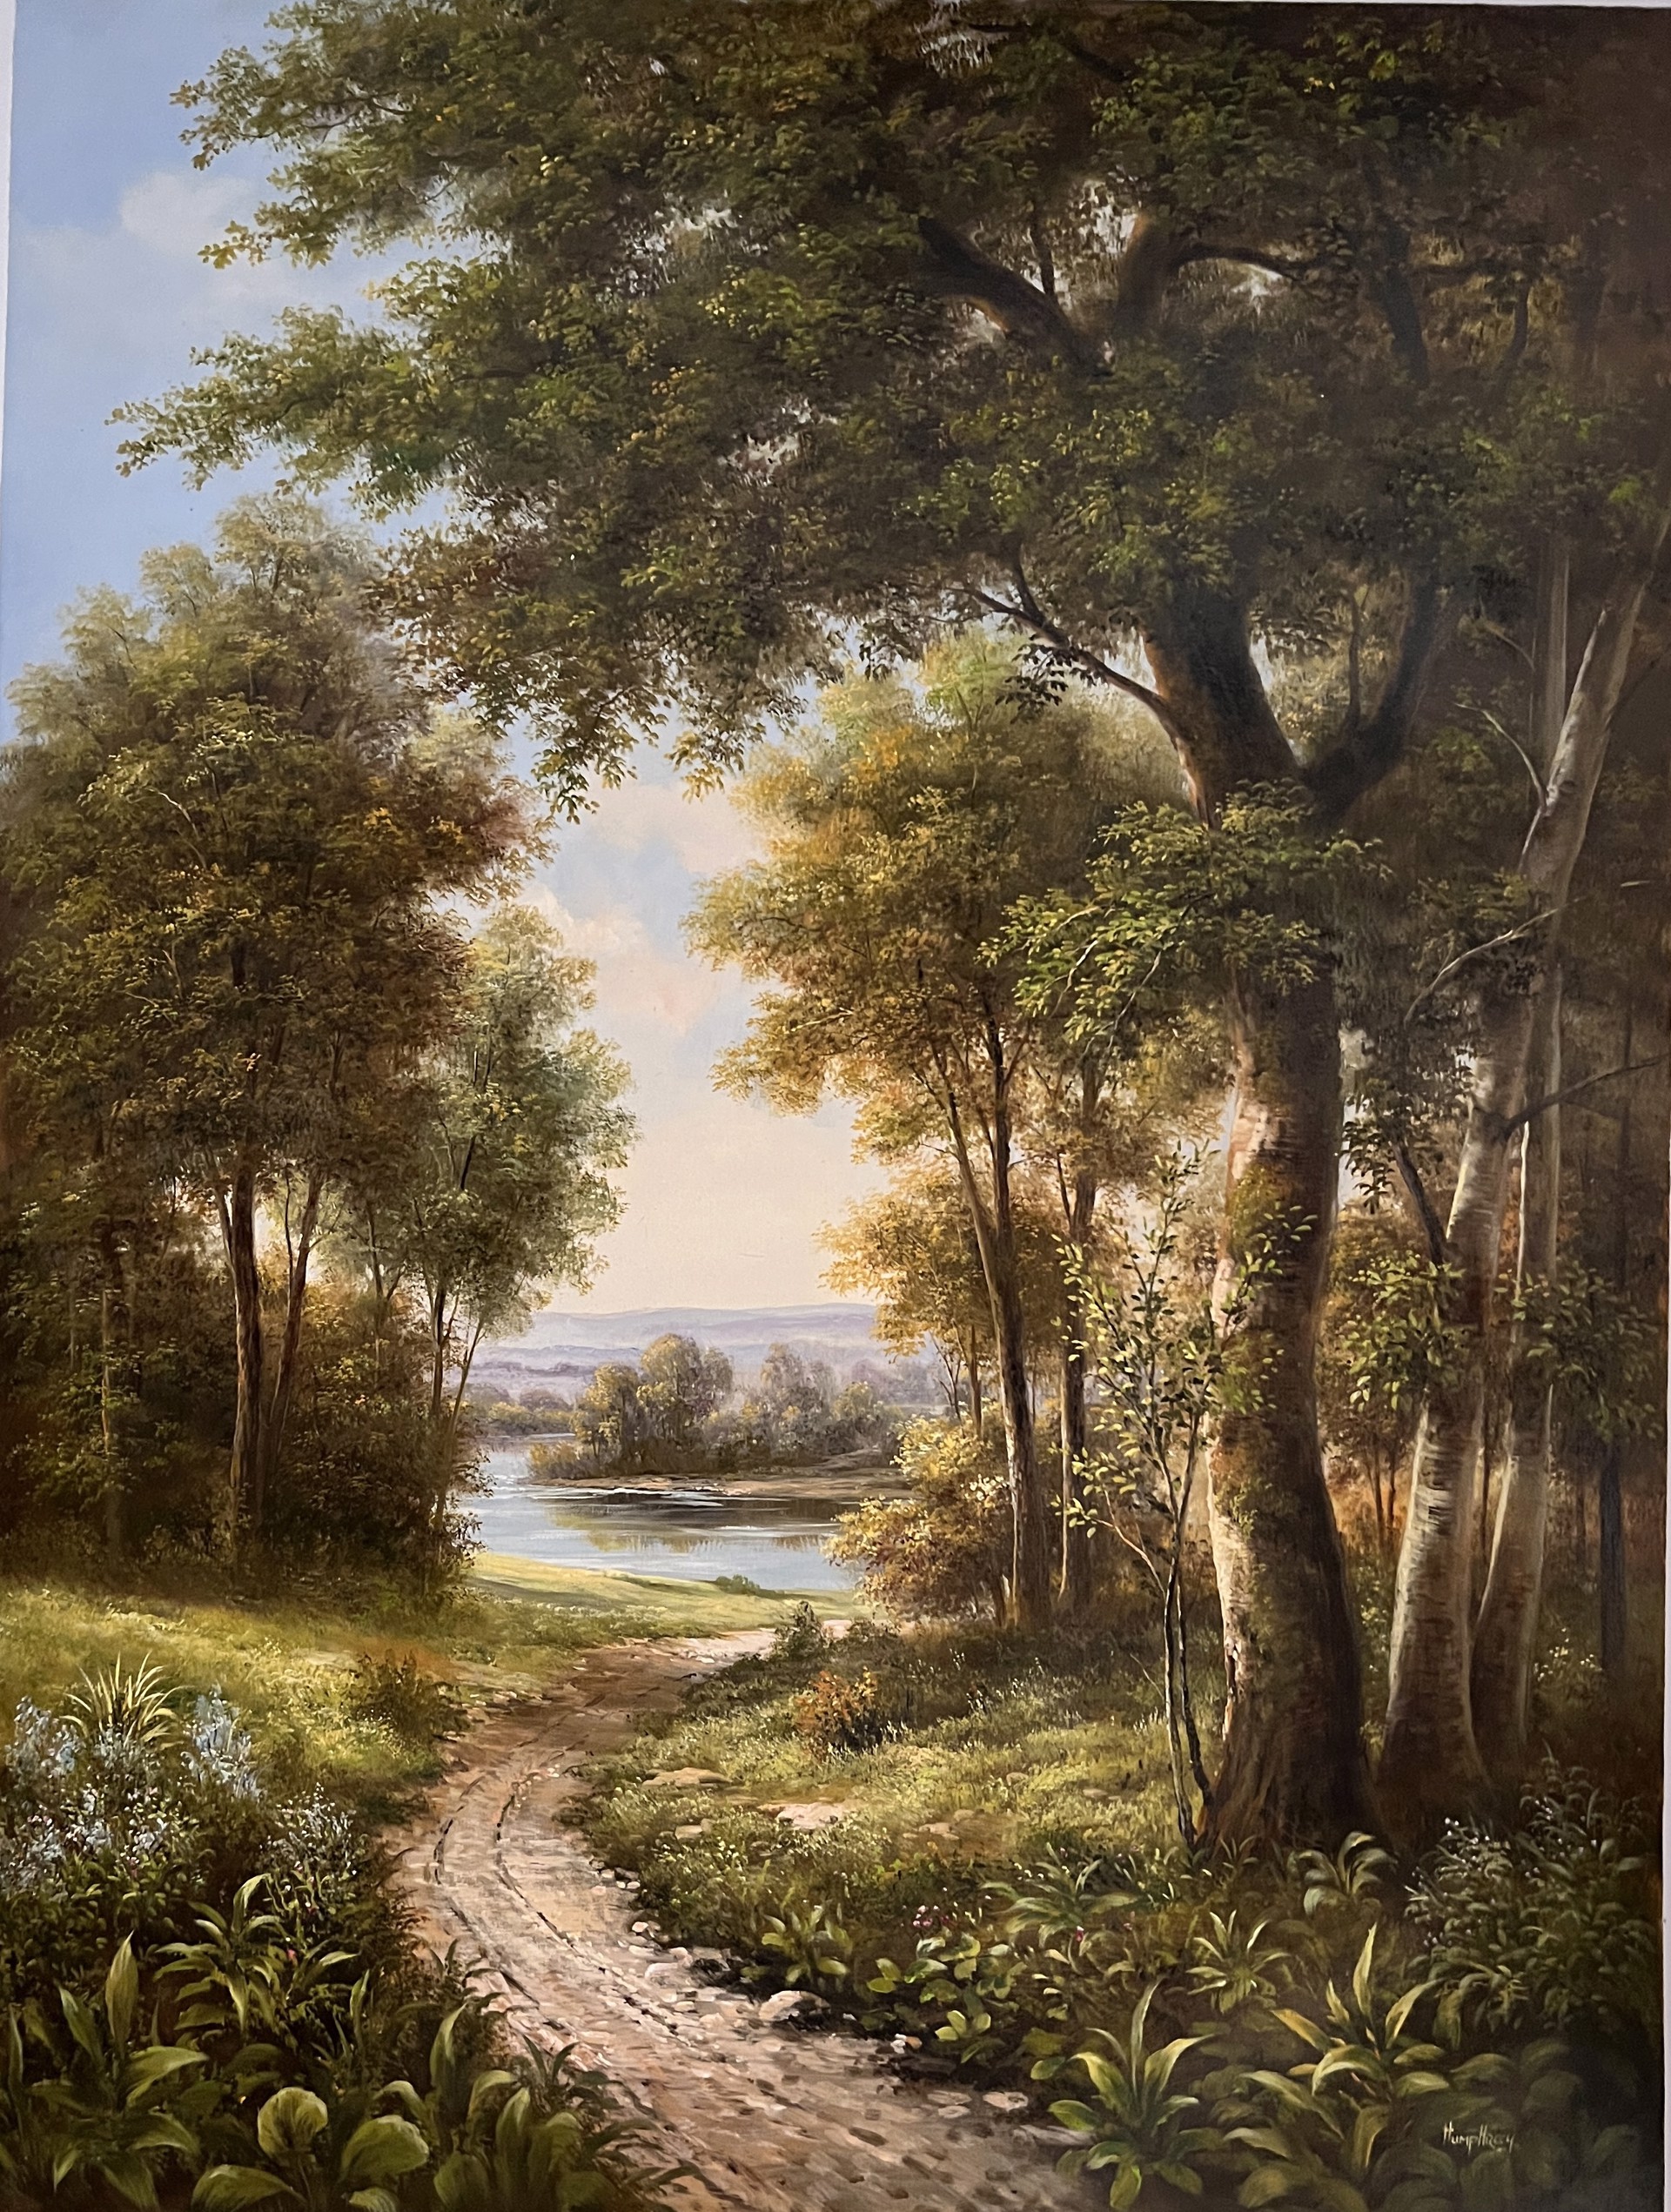 ROAD TO THE RIVER II by HUMPHREY